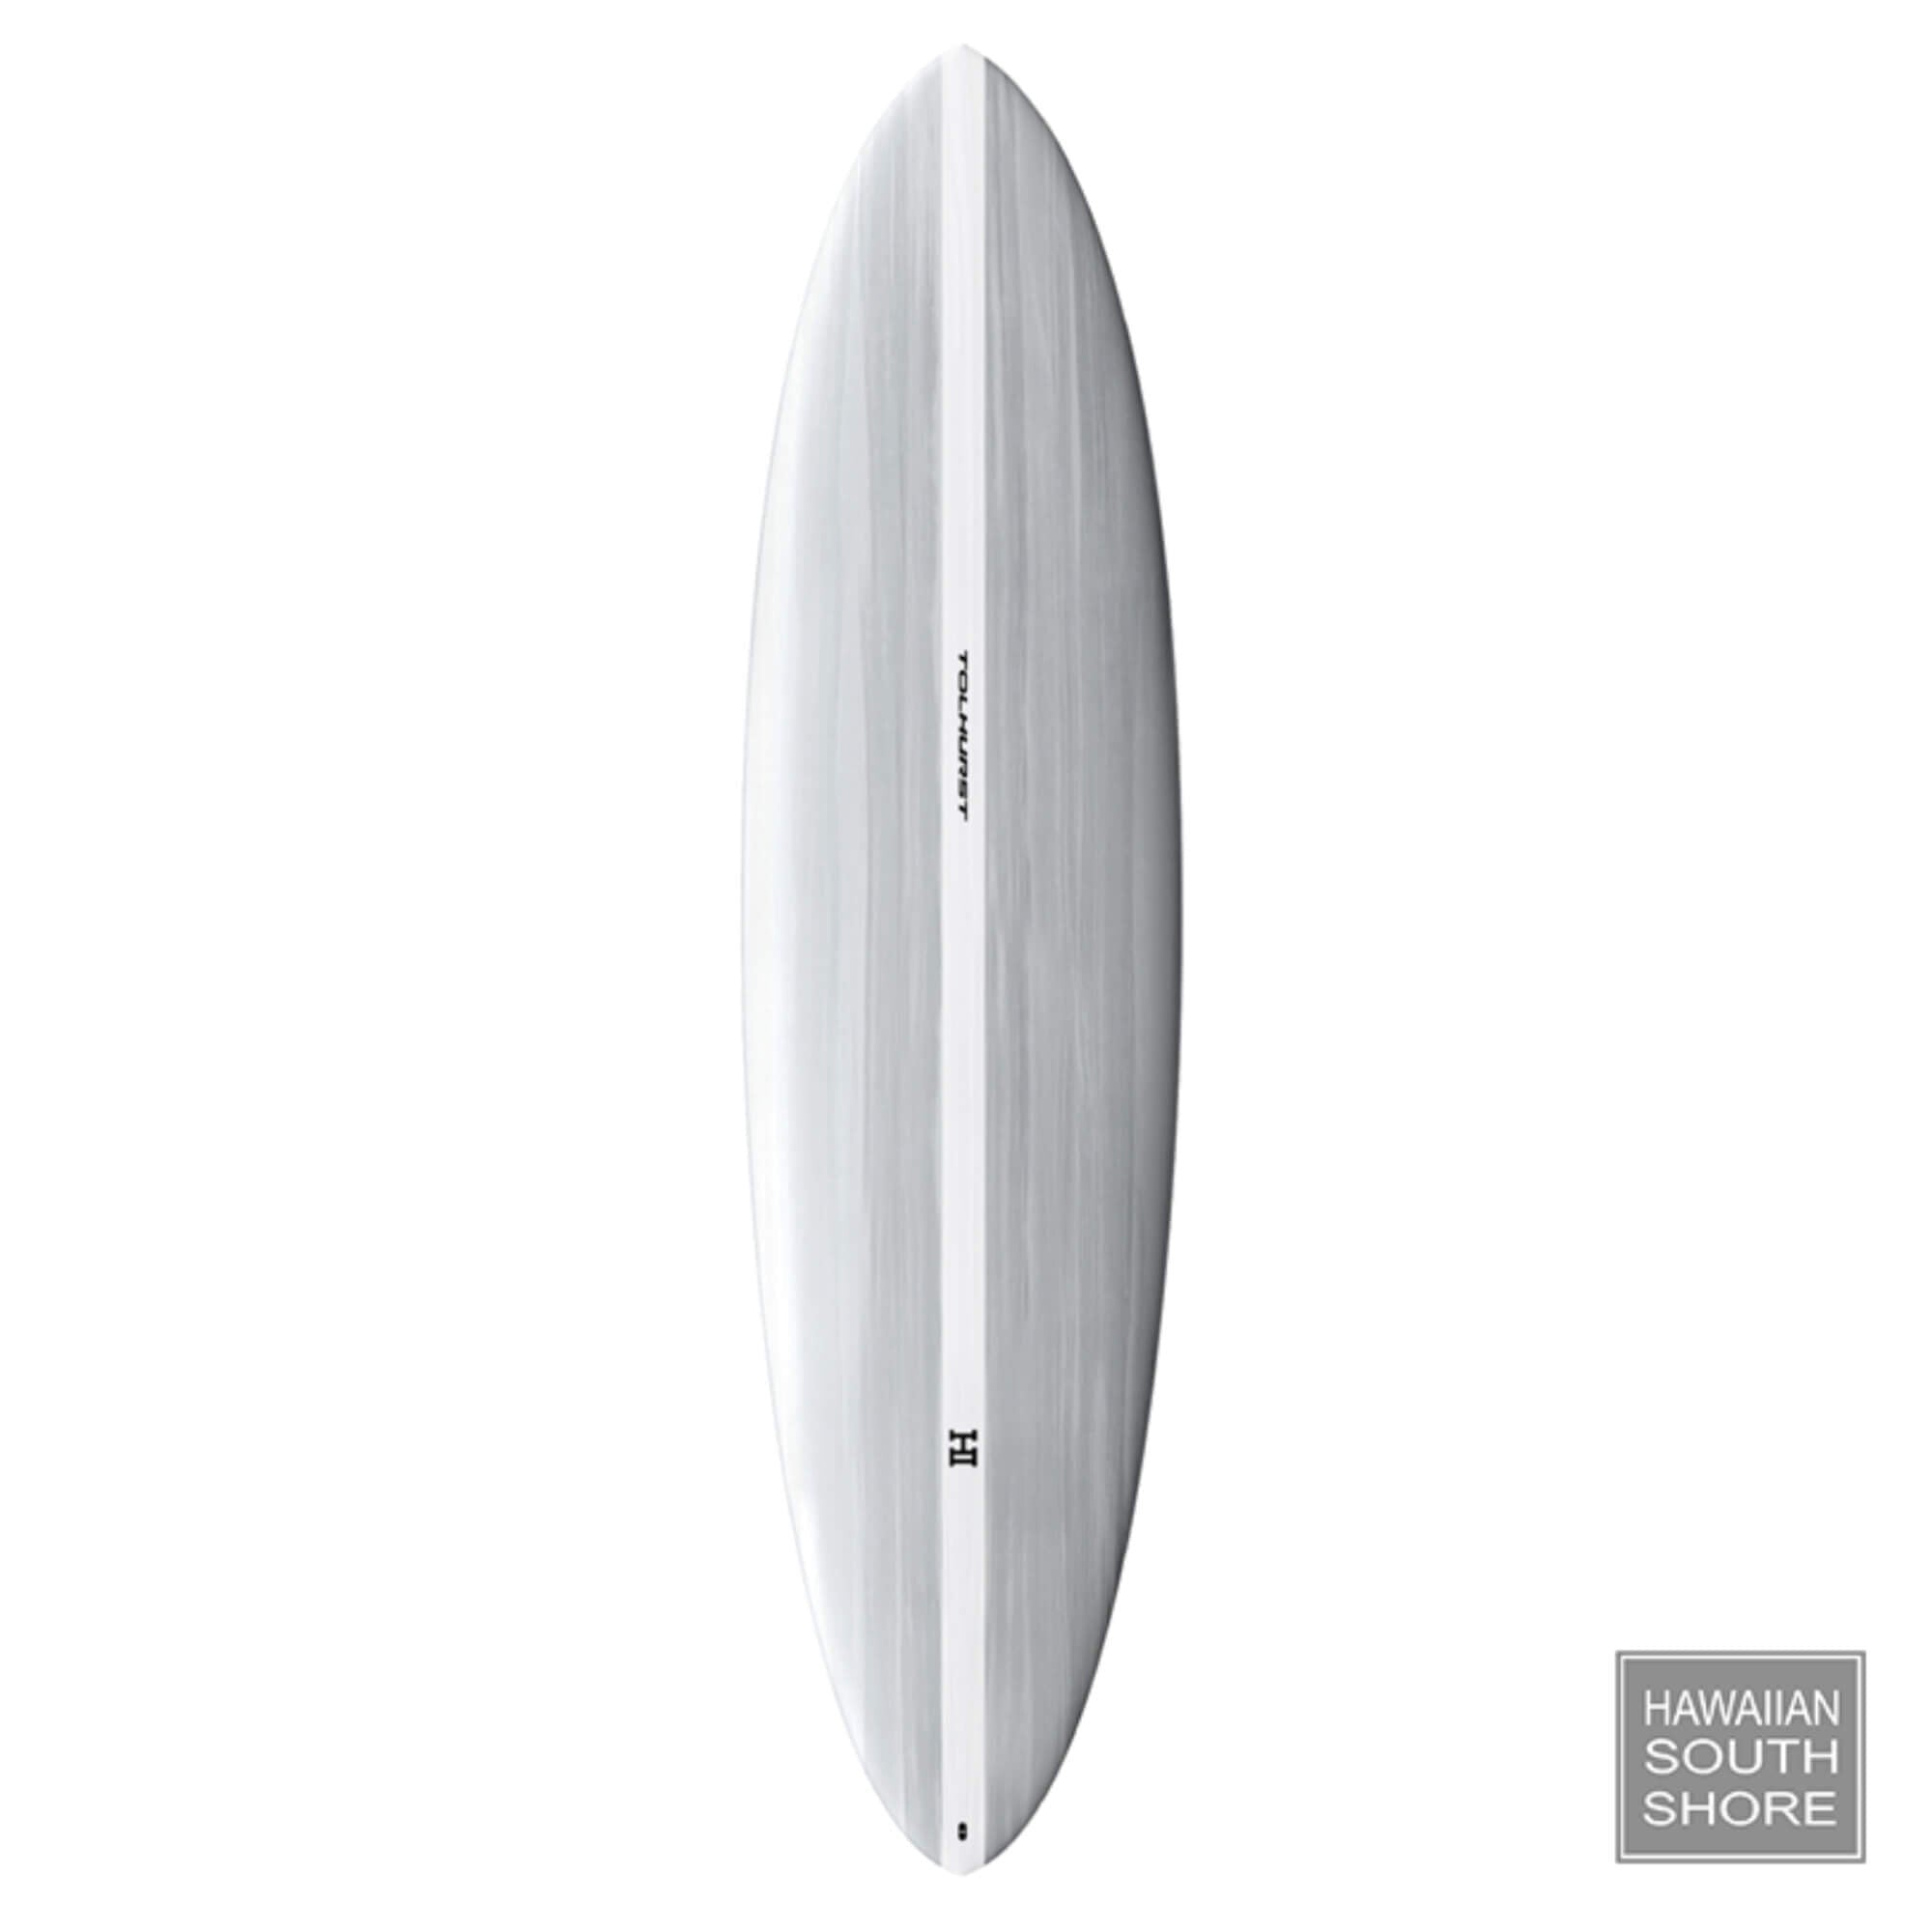 Harley Ingleby MID 6 MINI 5 Fin (6'4-6'8) FCS 2 Thunderbolt Red Candy/White